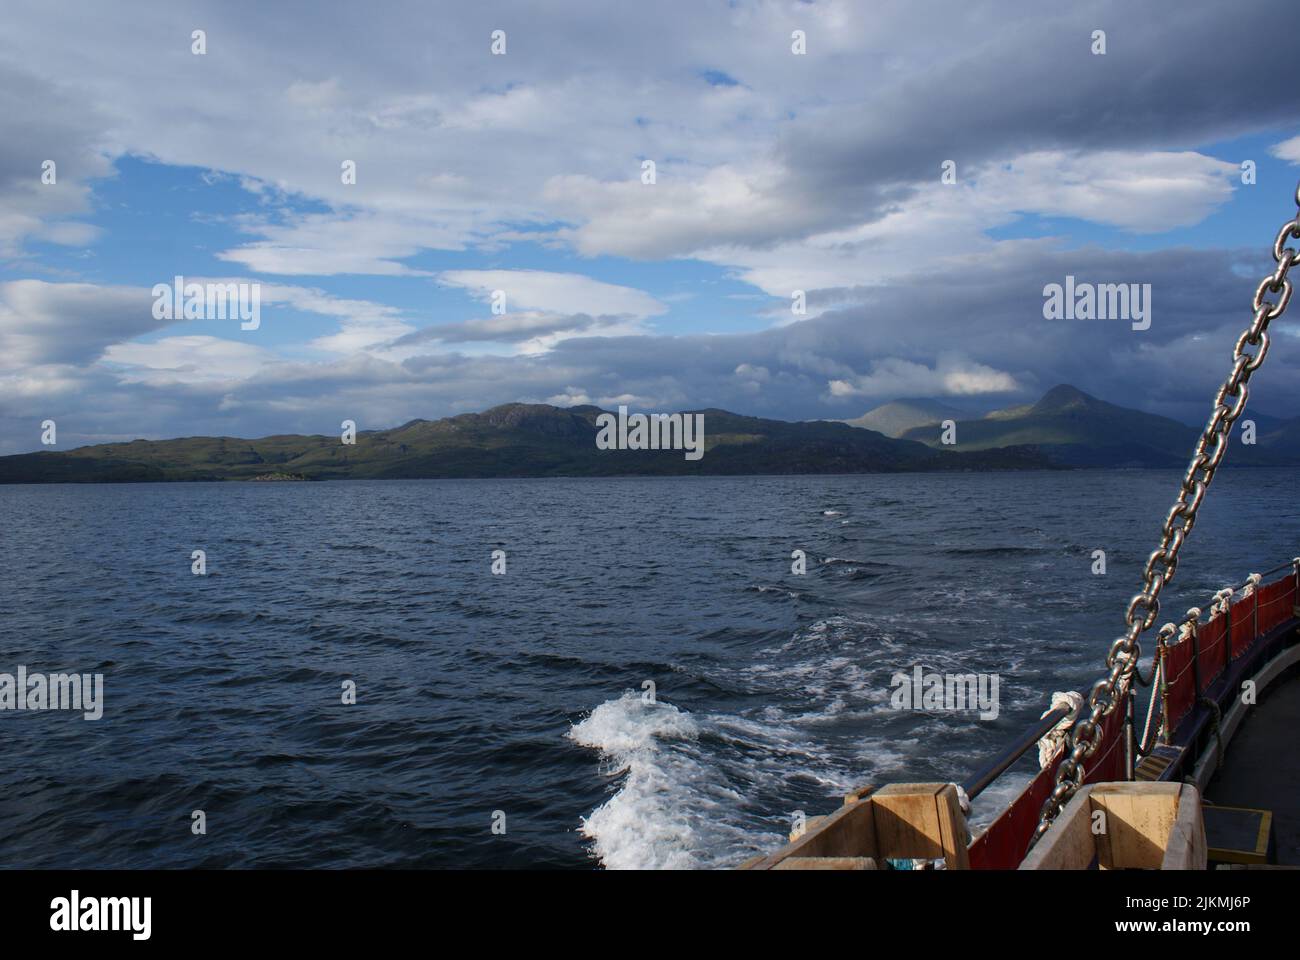 A beautiful view of waves on the sea behind a boat in Scotland Stock Photo